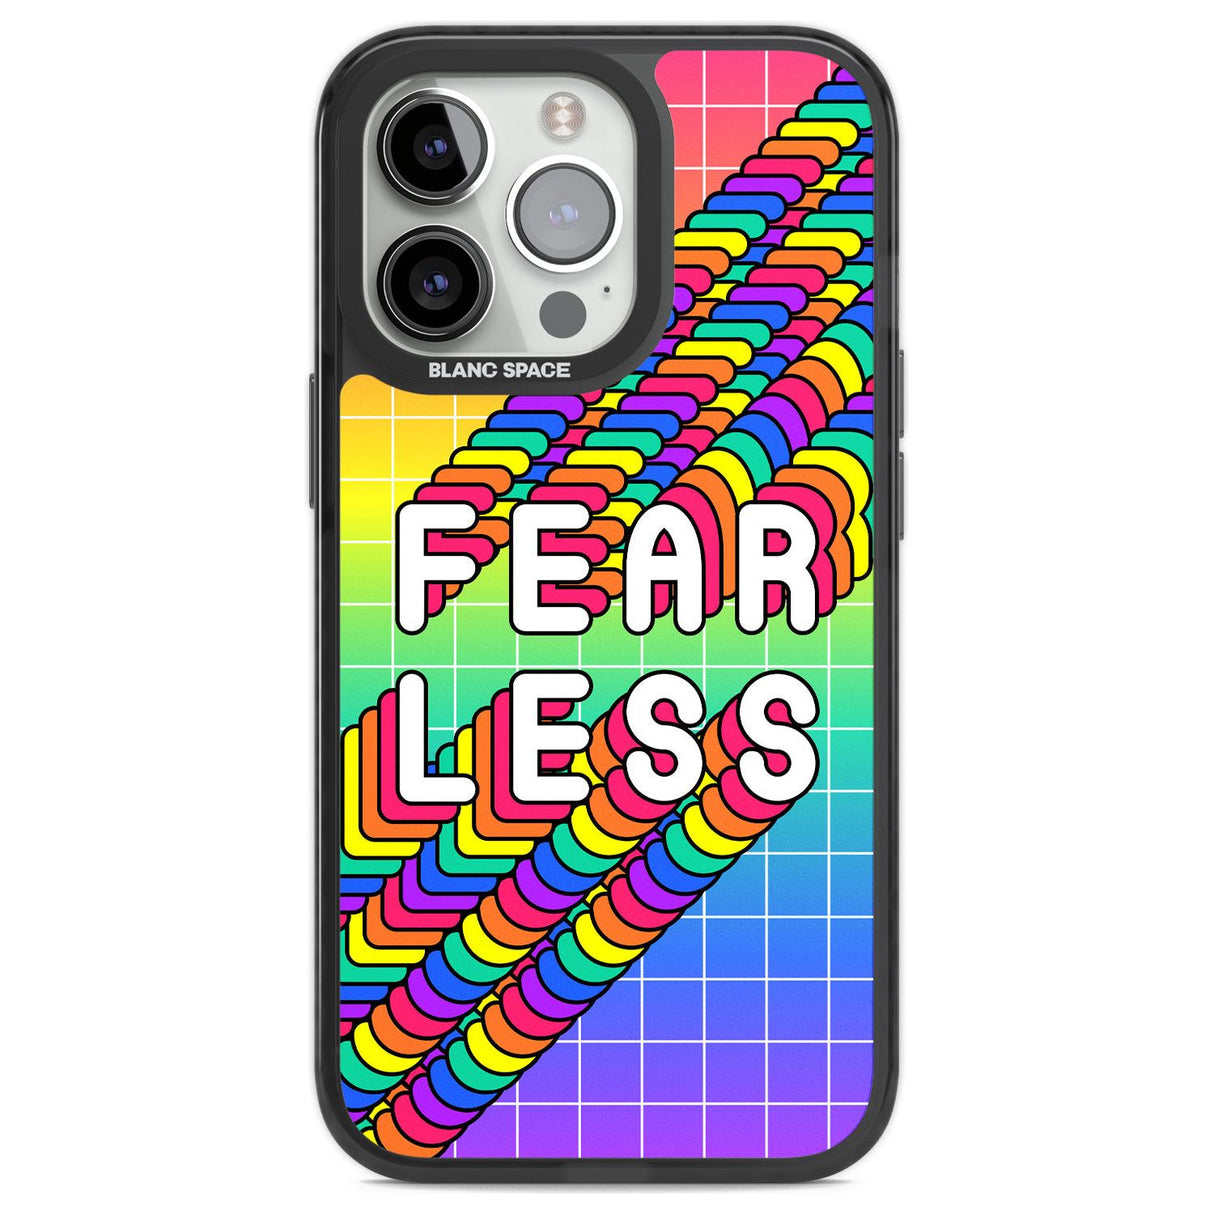 Fearless Phone Case iPhone 13 Pro / Black Impact Case,iPhone 14 Pro / Black Impact Case,iPhone 15 Pro Max / Black Impact Case,iPhone 15 Pro / Black Impact Case Blanc Space